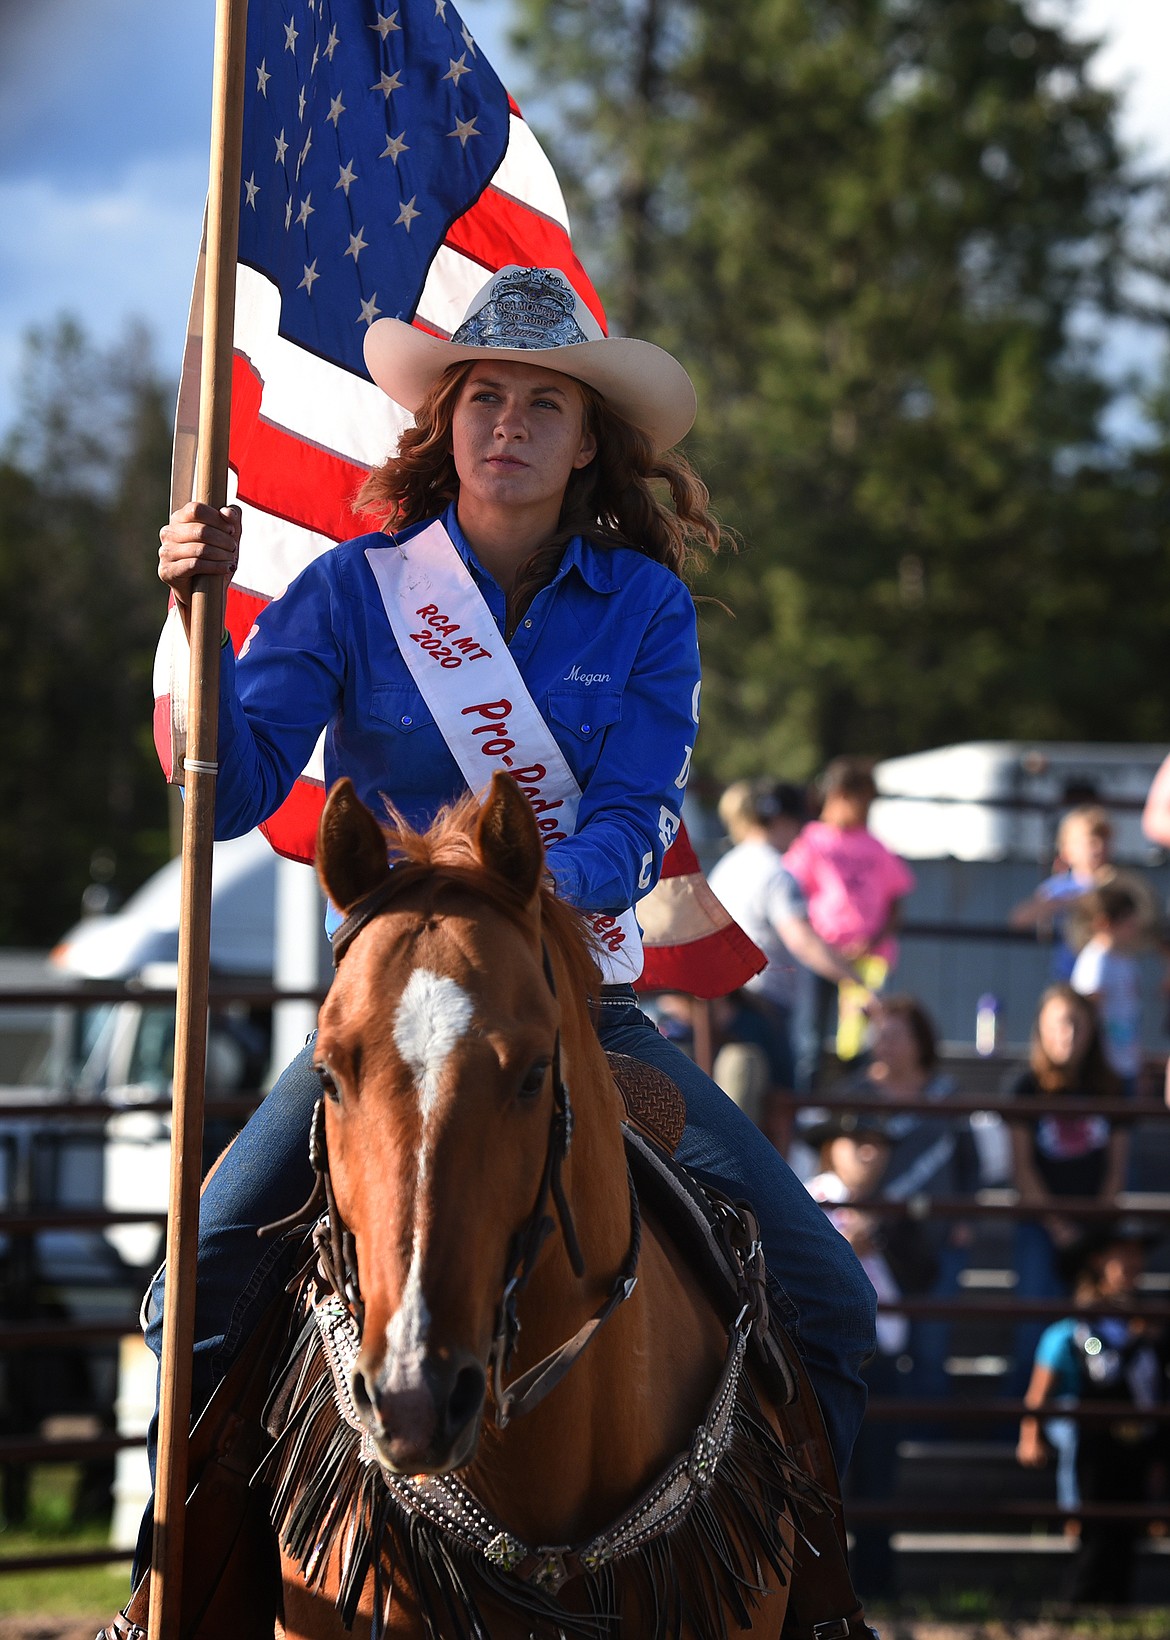 Megan Tutvedt, Rodeo Champions of America 2020 Queen for Montana, brings the American flag into the area on her horse, Peppy. (Jeremy Weber/Daily Inter Lake)